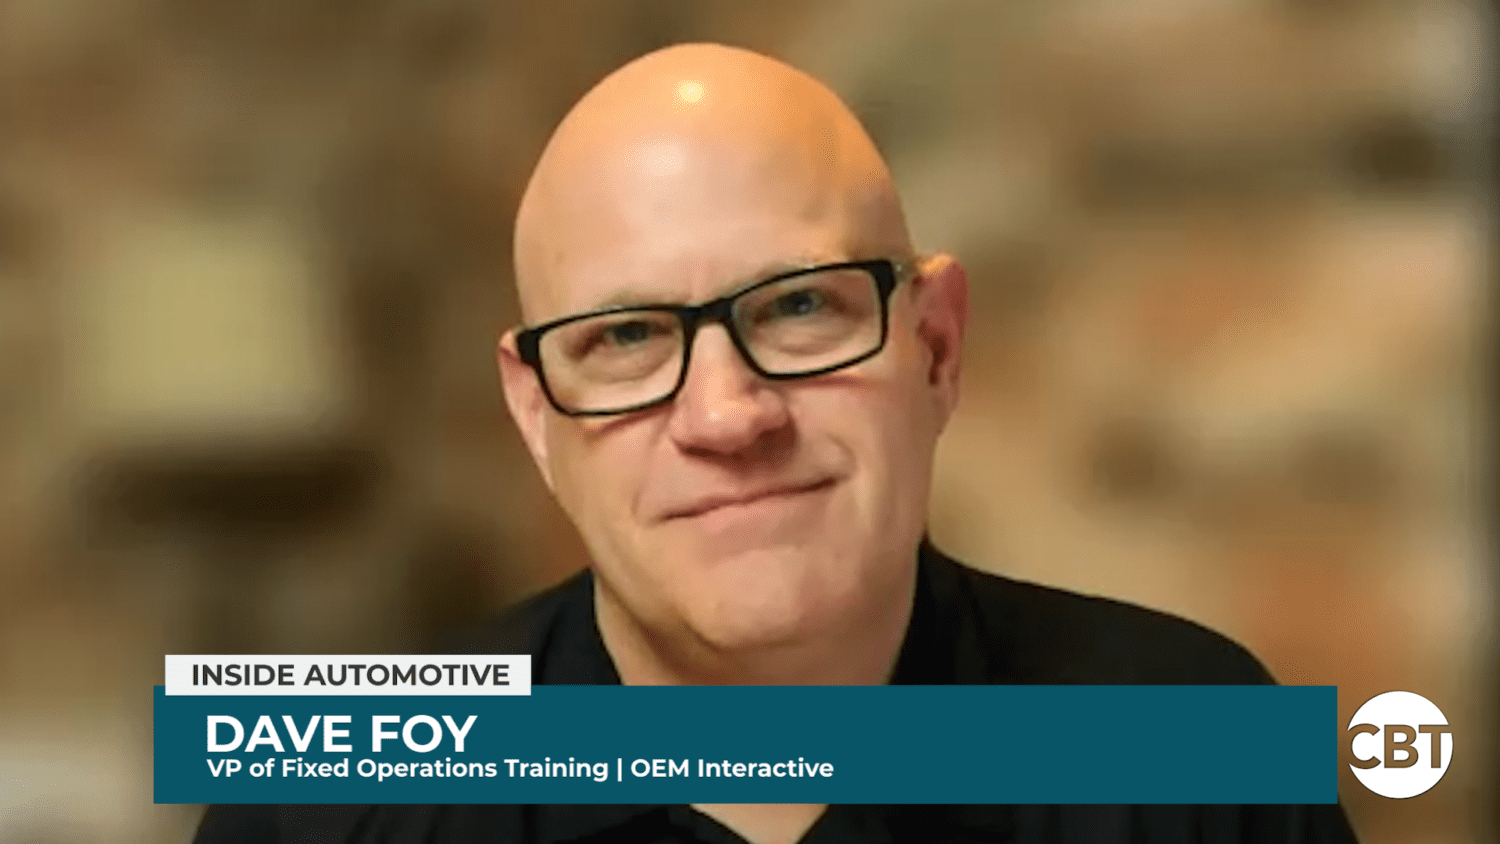 Dave Foy joins Inside Automotive to discuss the latest trends in the fixed-ops sector, including the technician shortage and the impact of AI.